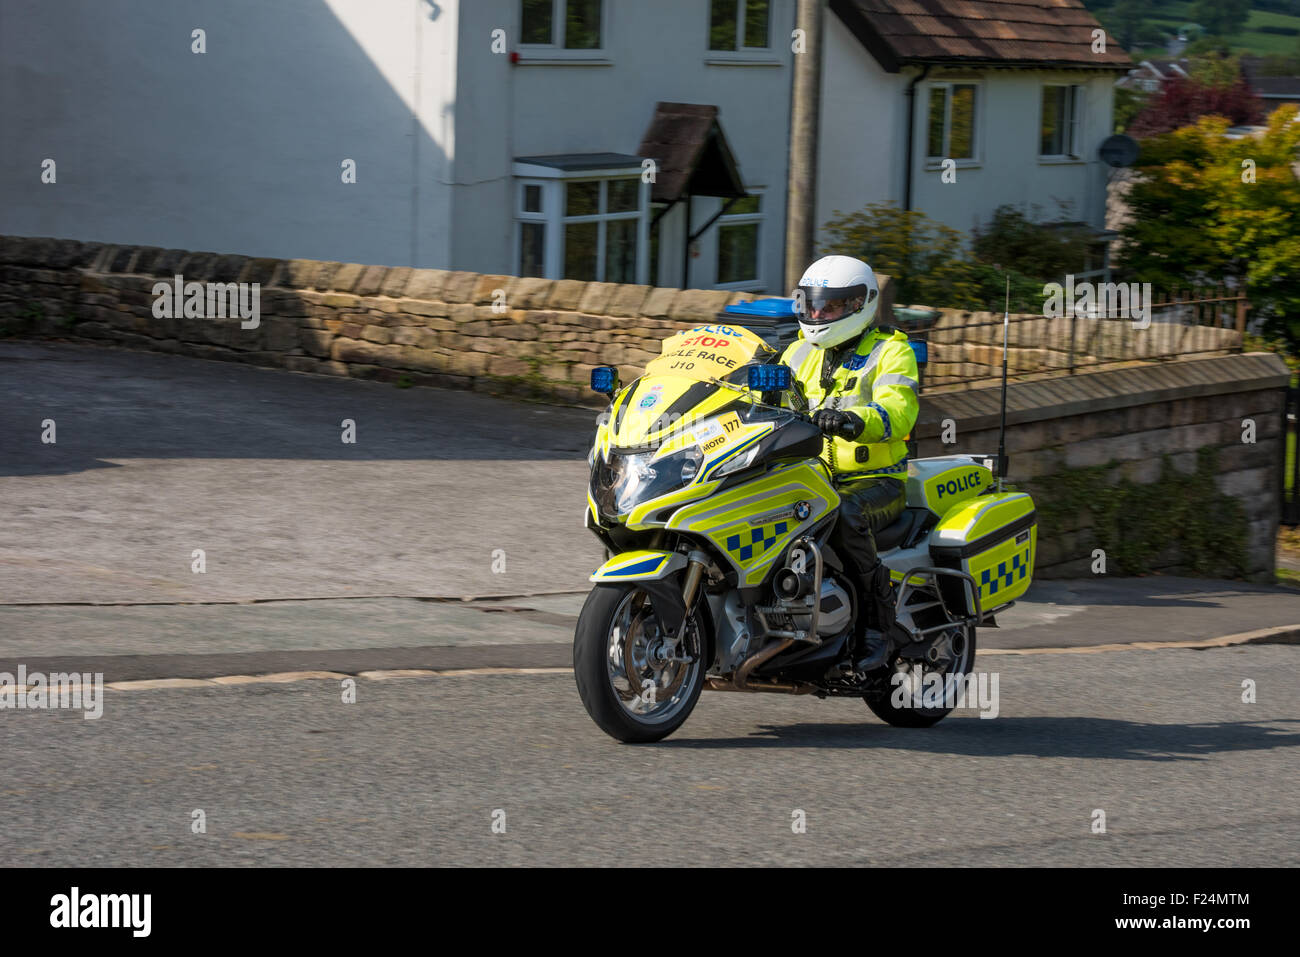 A Police Motorcyclist on a BMW R 1200 RT on Stage 6of the Tour of Britain  2015 Matlock Derbyshire UK Stock Photo - Alamy